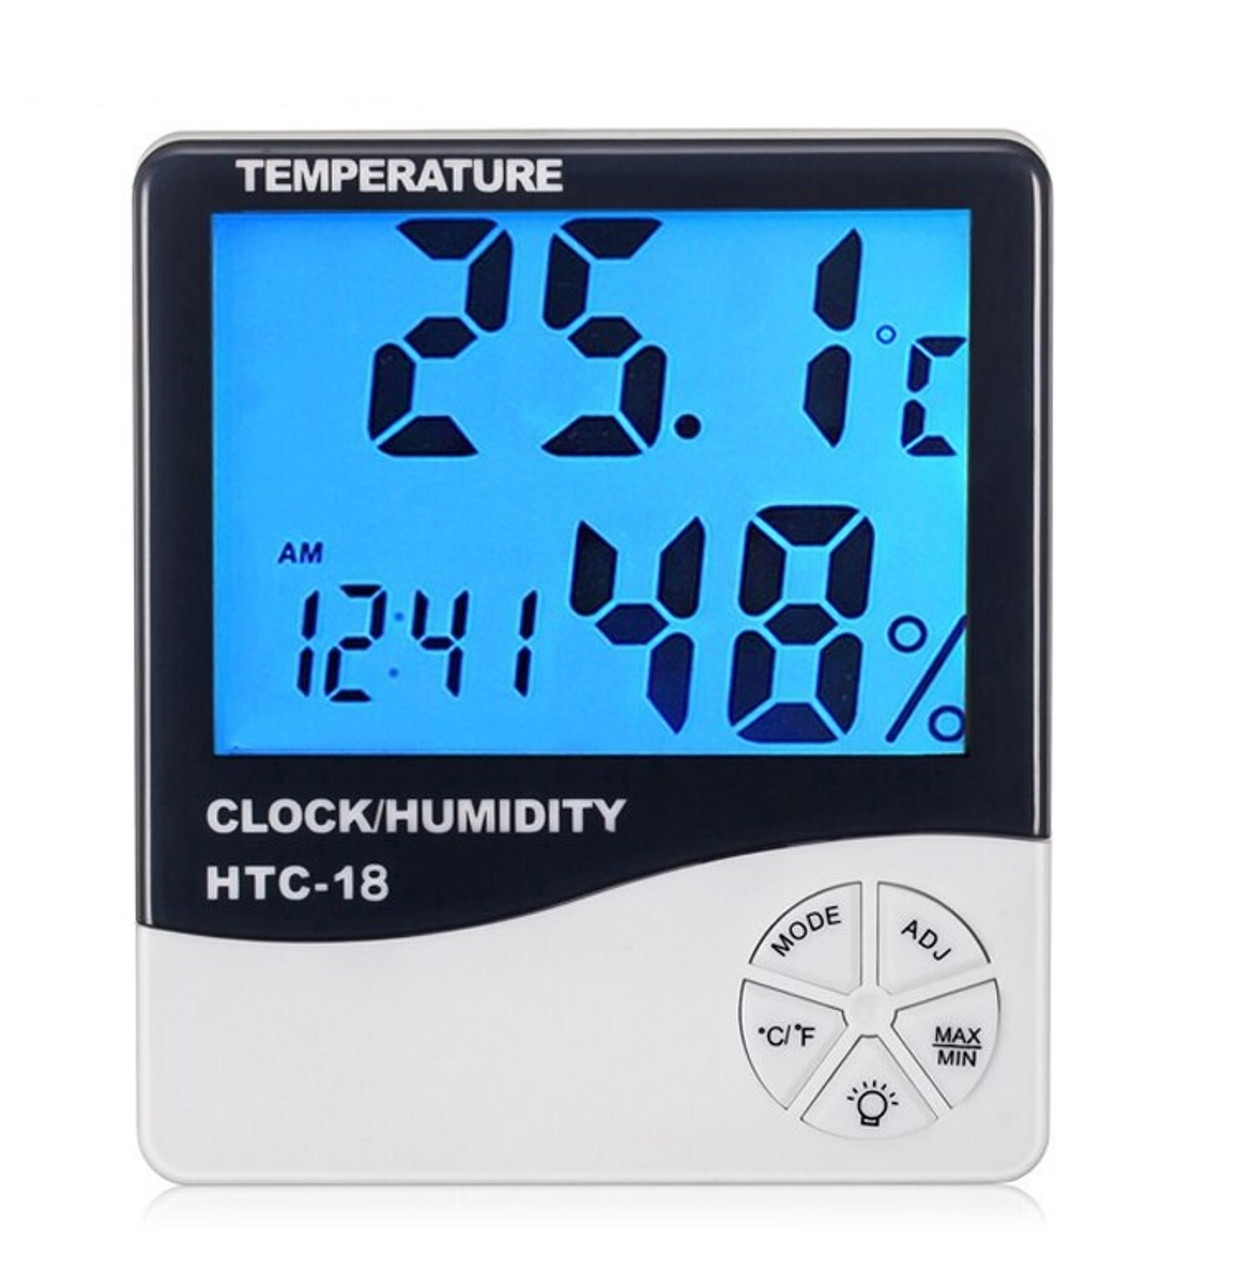 https://cdn11.bigcommerce.com/s-yo2n39m6g3/images/stencil/1280x1280/products/2049/4525/HTC-1-Electronic-Temperature-Humidity-Meter-Indoor-Room-Digital-Thermometer-Hygrometer-Weather-Station-Alarm-Clock__03694.1599808836.jpg?c=2